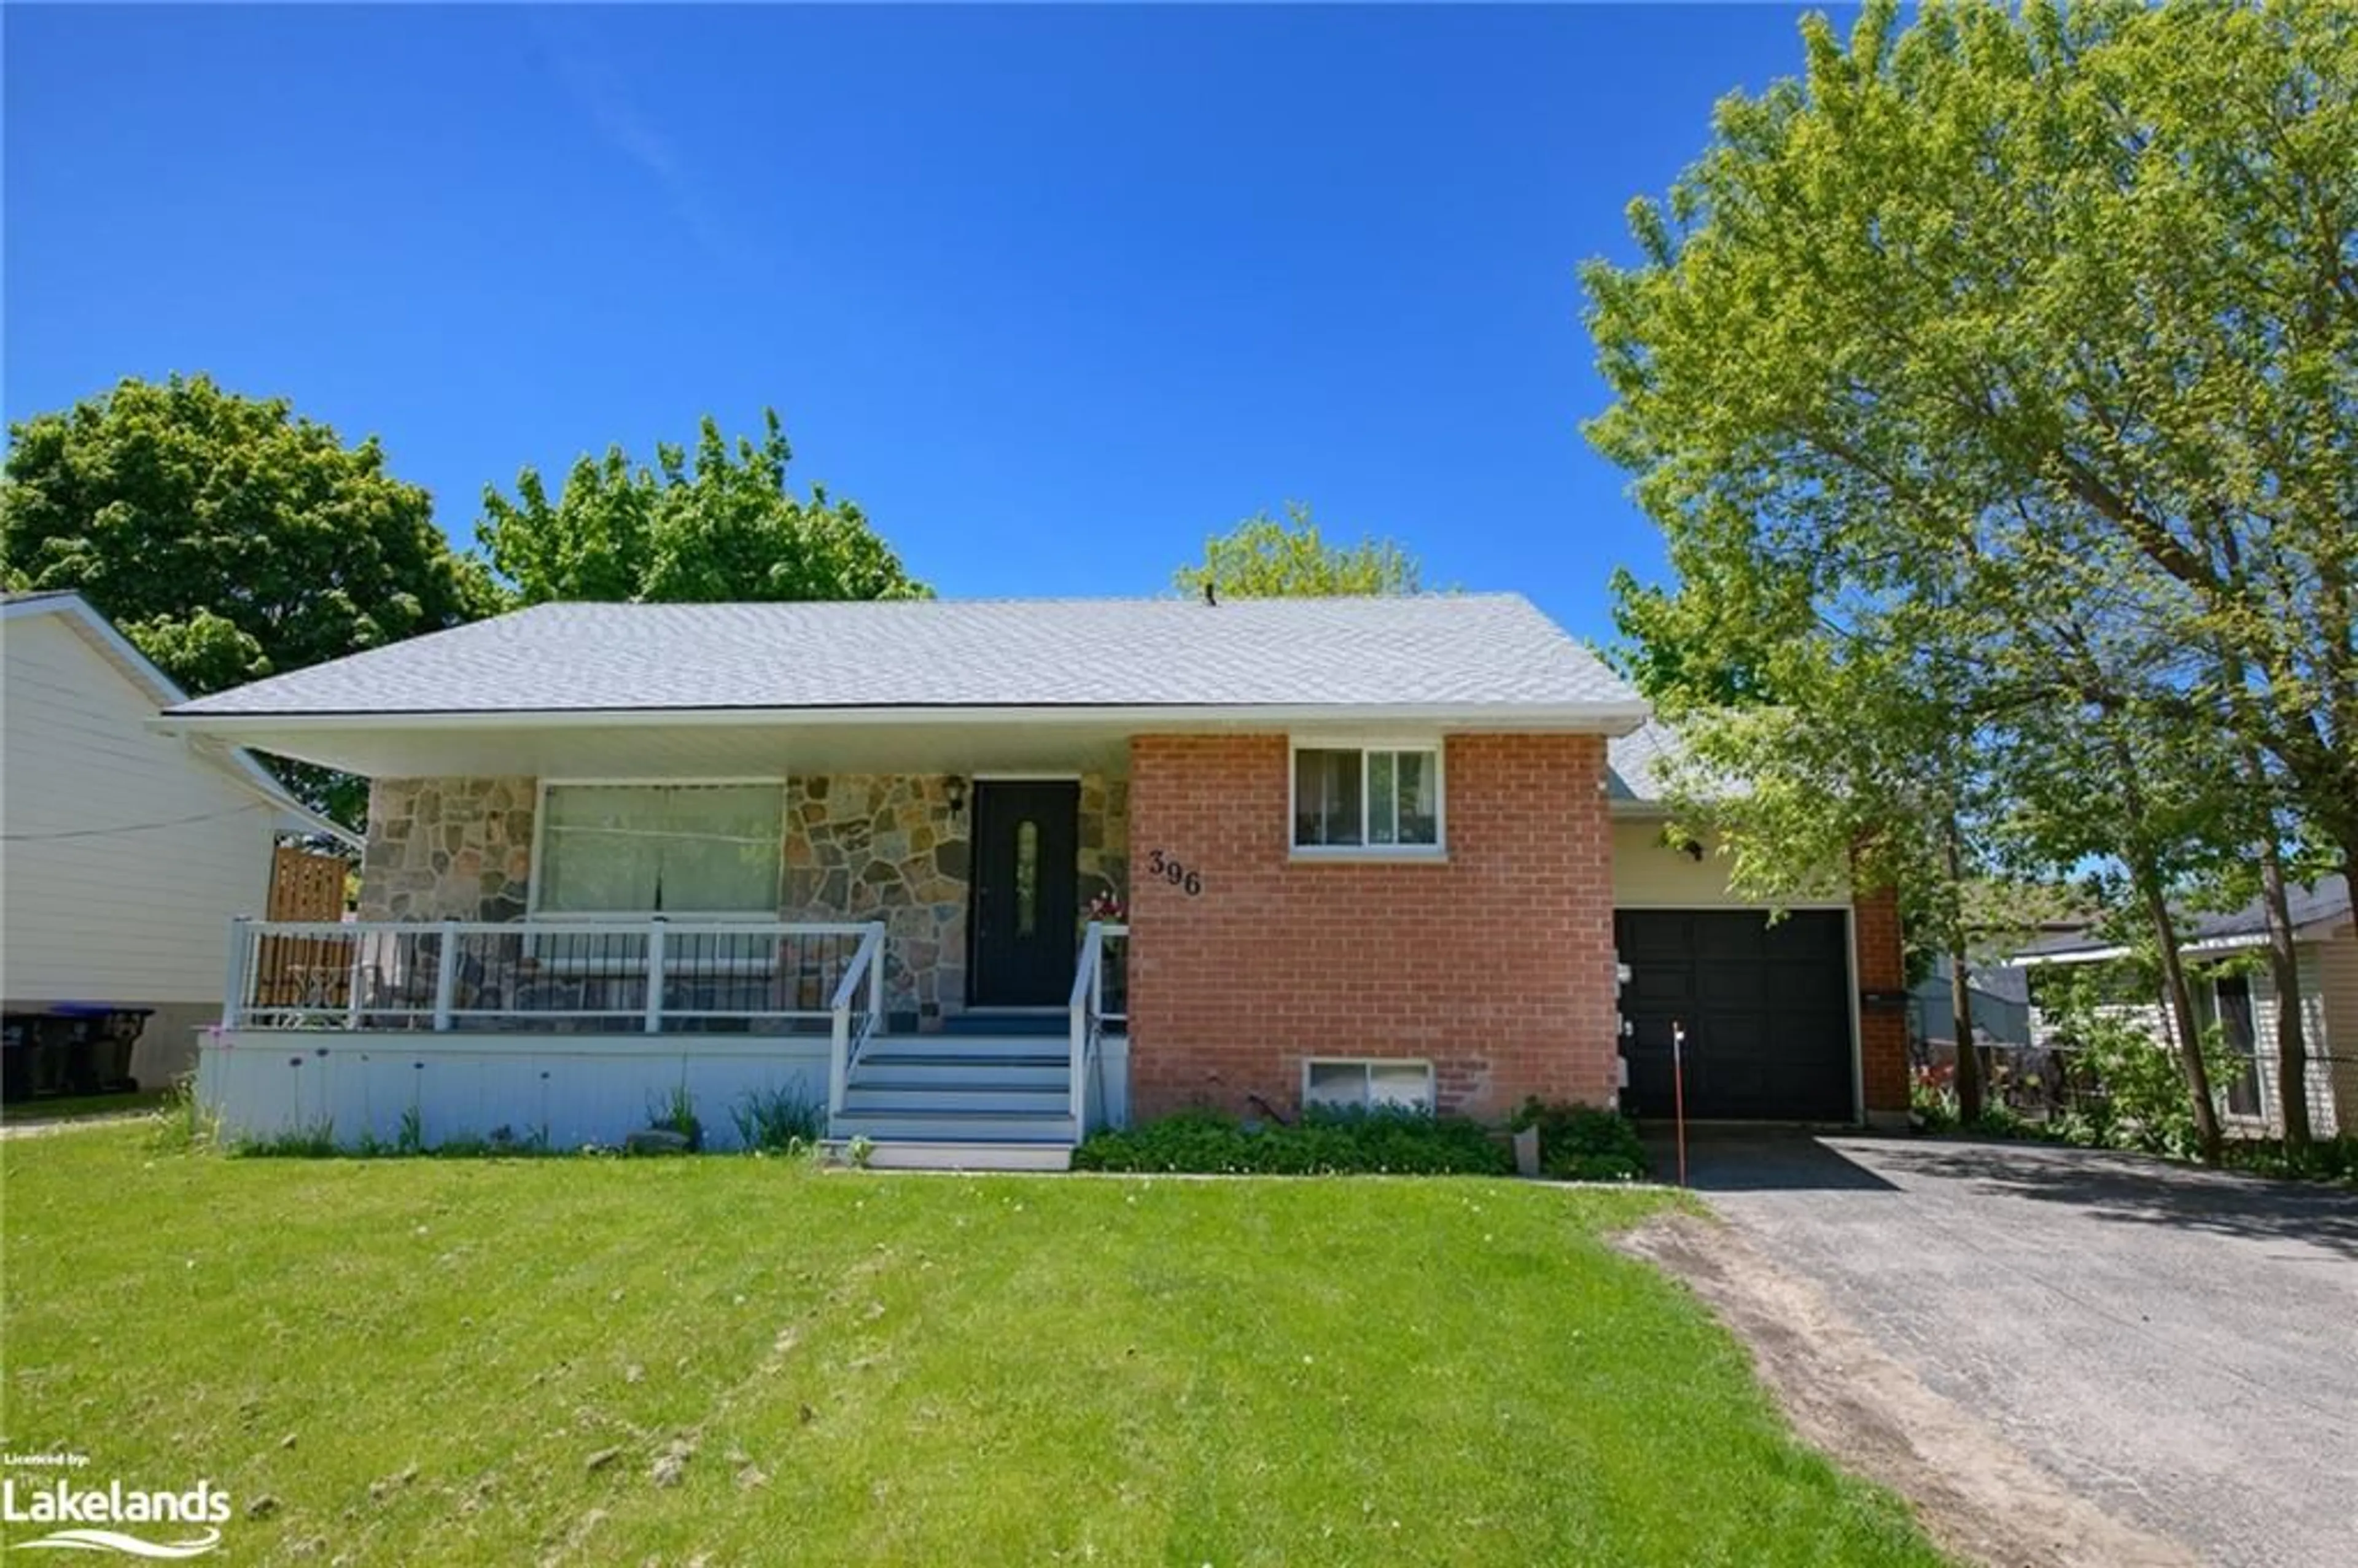 Frontside or backside of a home for 396 Walnut St, Collingwood Ontario L9Y 4C7